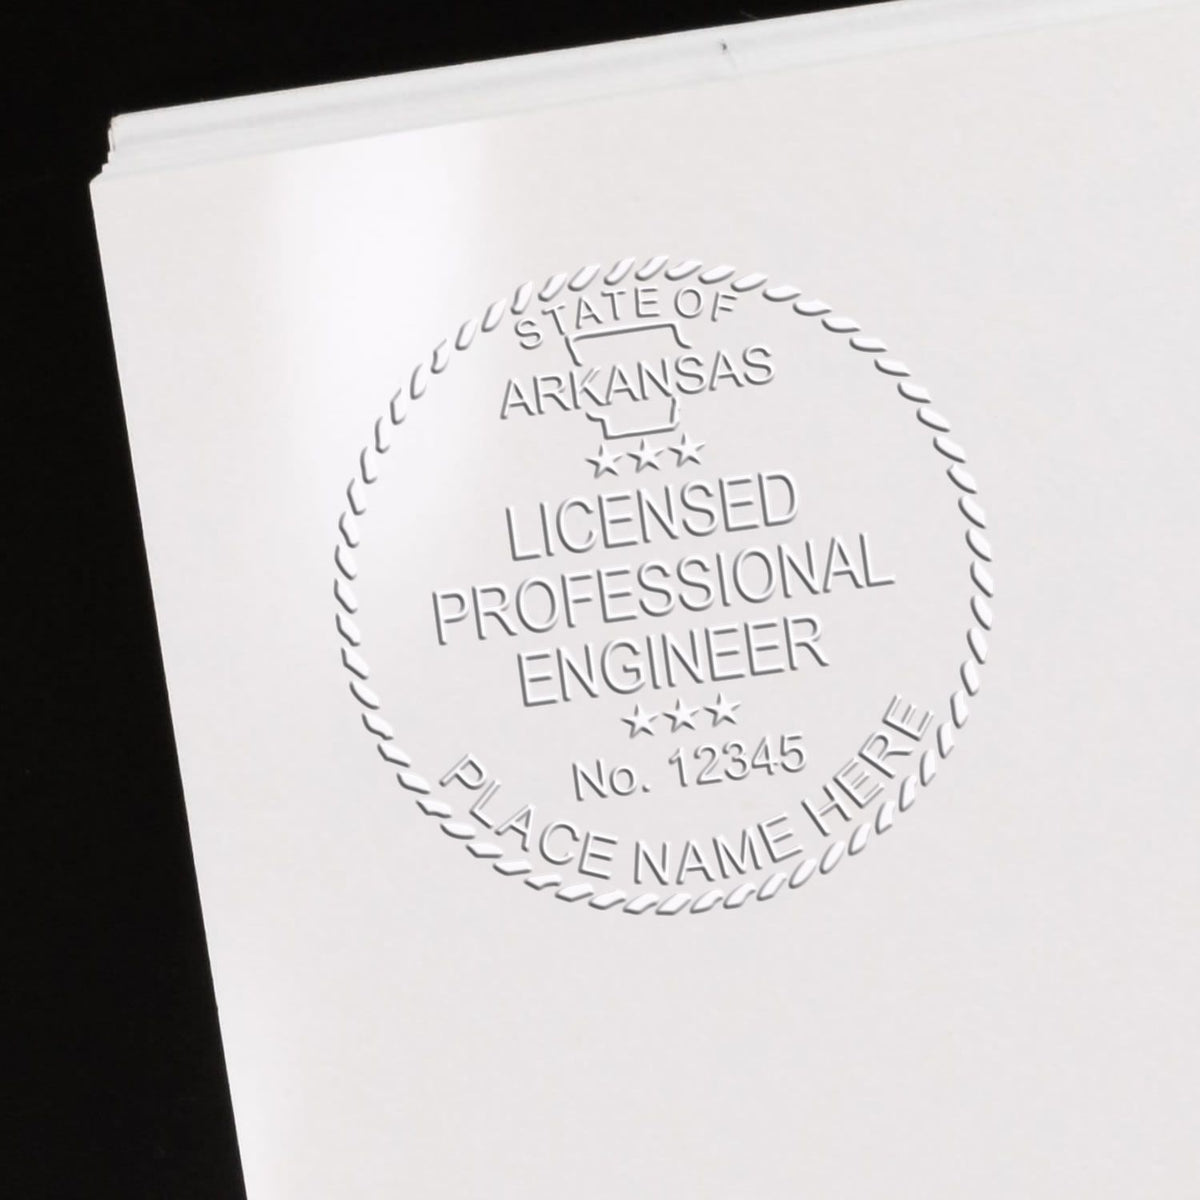 An alternative view of the Heavy Duty Cast Iron Arkansas Engineer Seal Embosser stamped on a sheet of paper showing the image in use